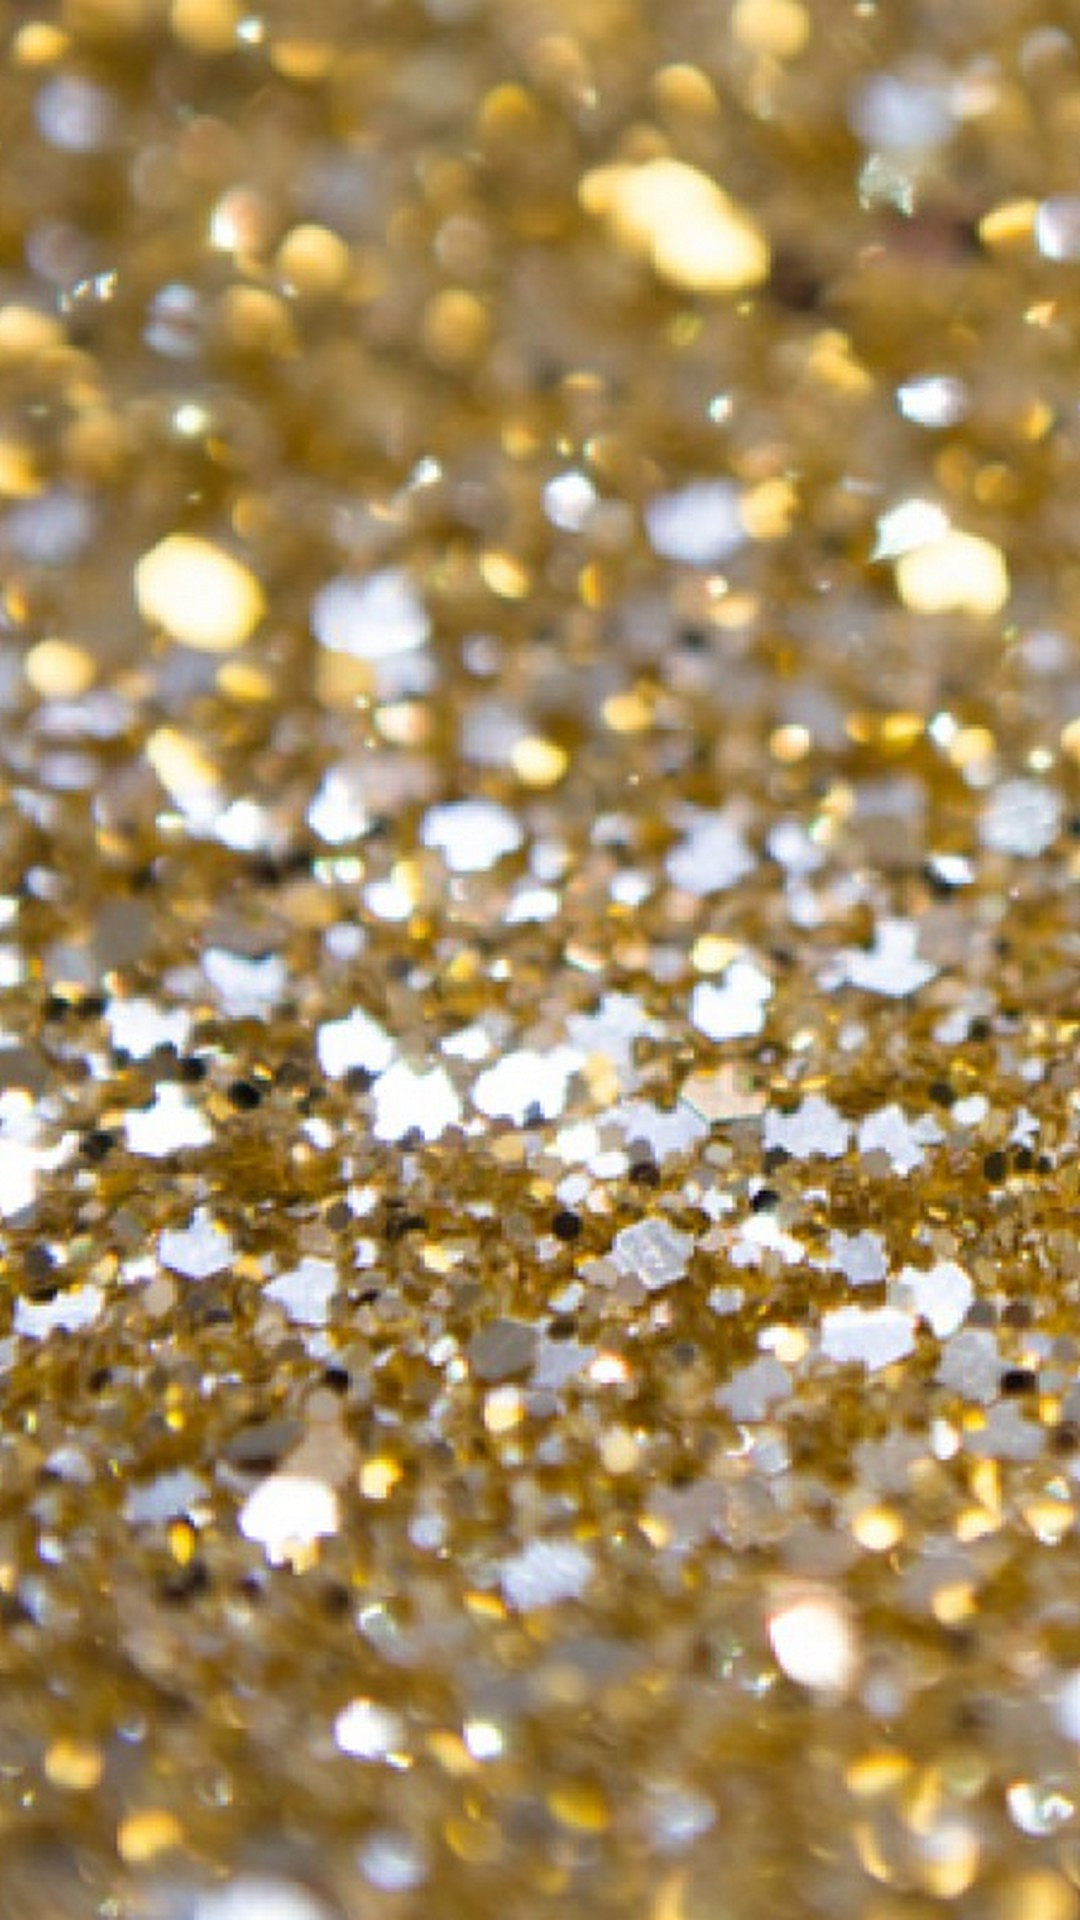 1080x Gold Sparkle iPhone Background HD Lovely HD Wallpaper For I Phone HD Wallpaper